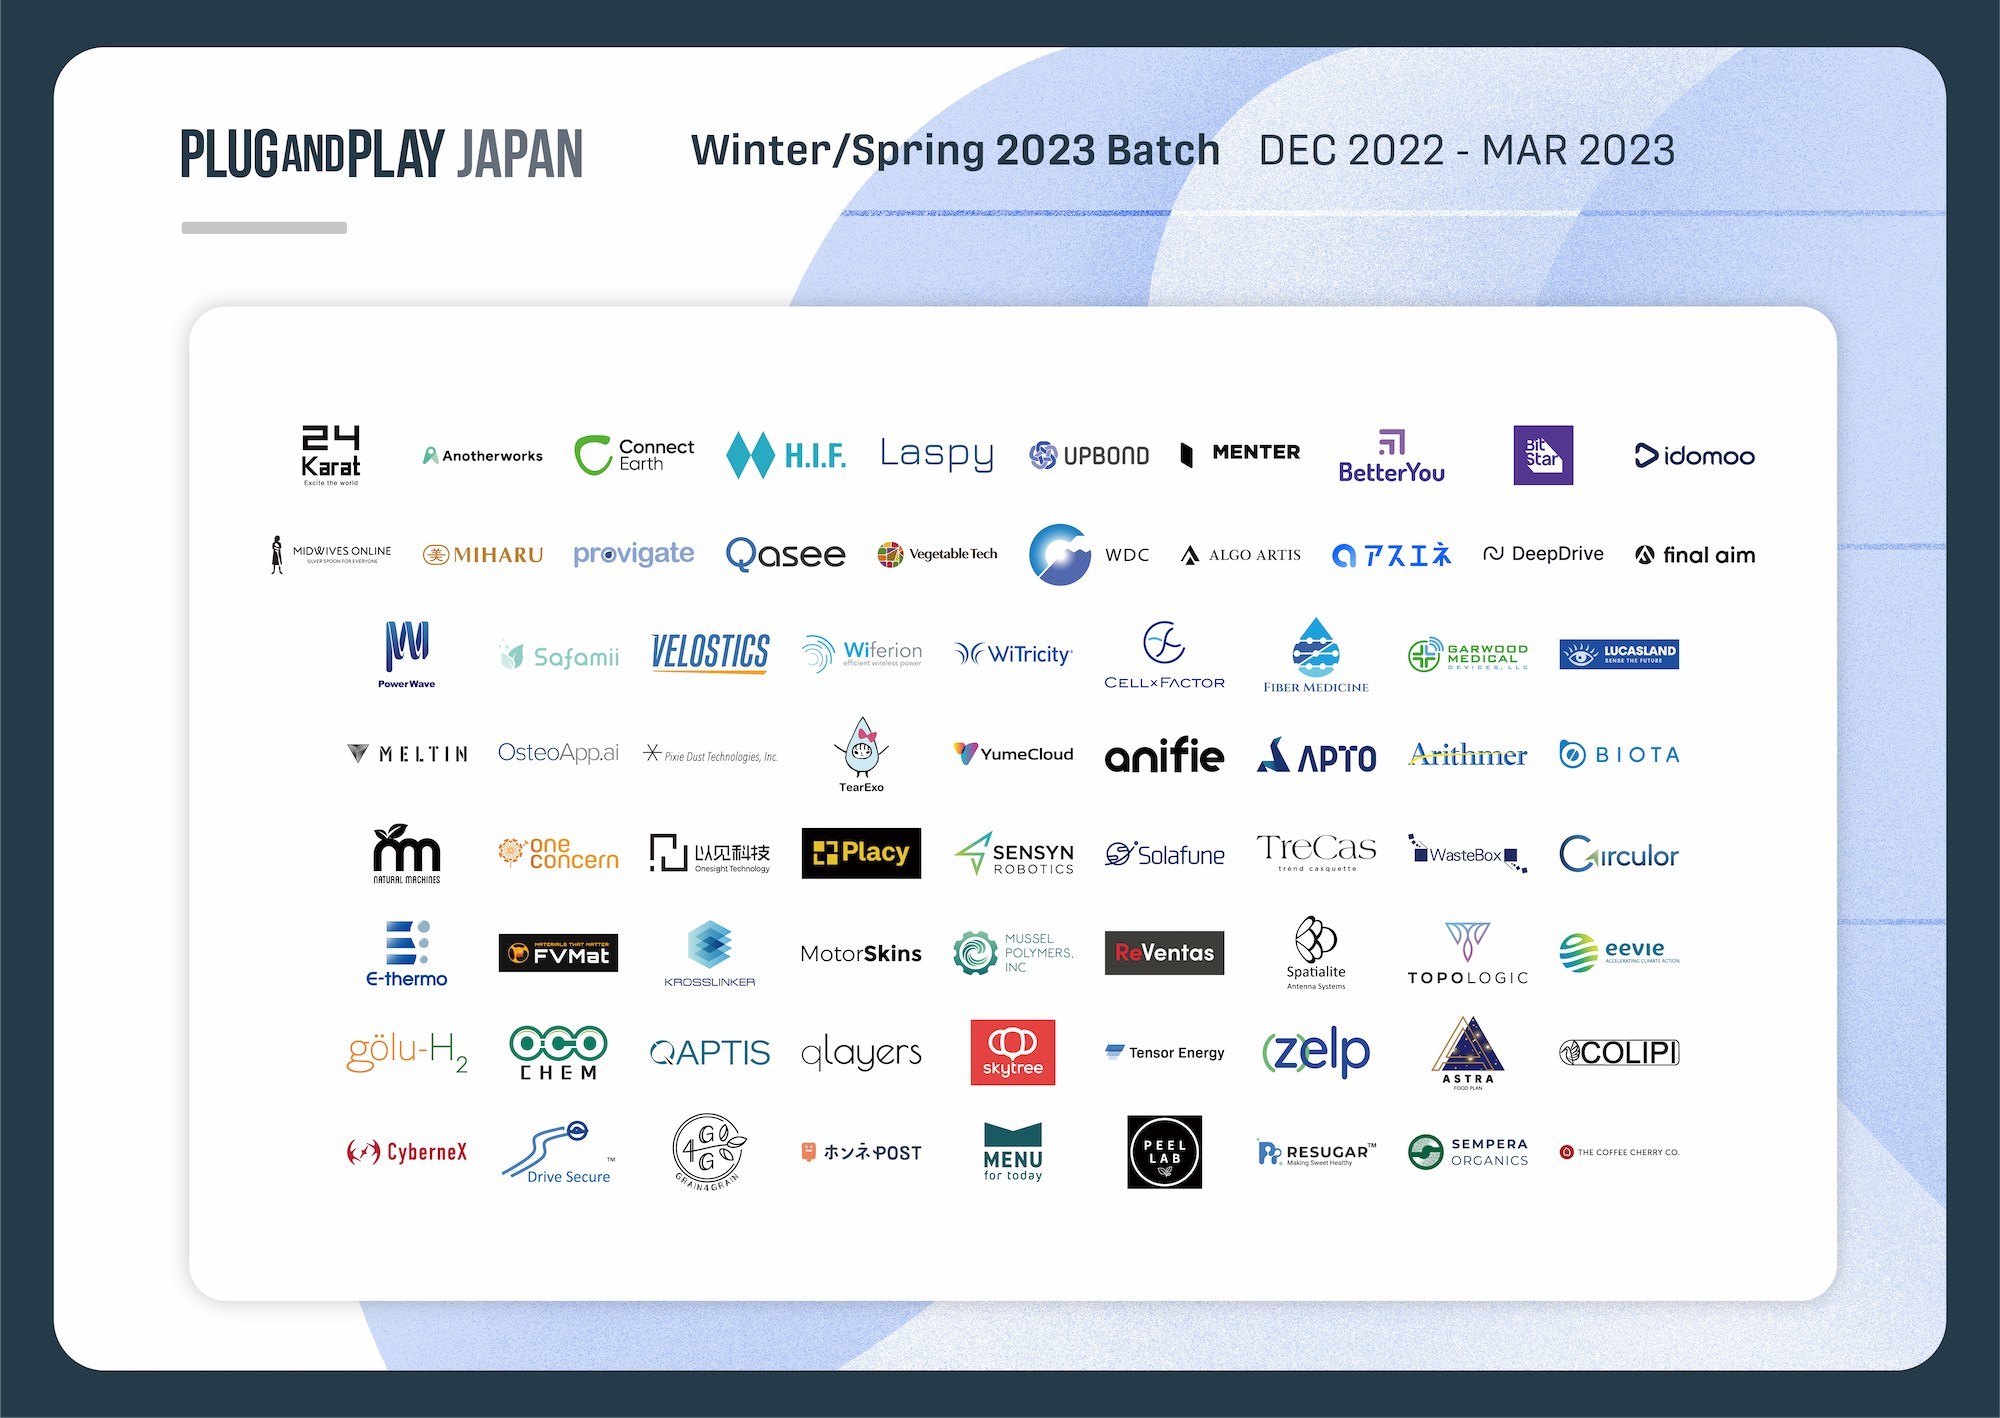 Plug and Play Japan Selects 74 startups for its Winter/Spring 2023 Batch Accelerator Program